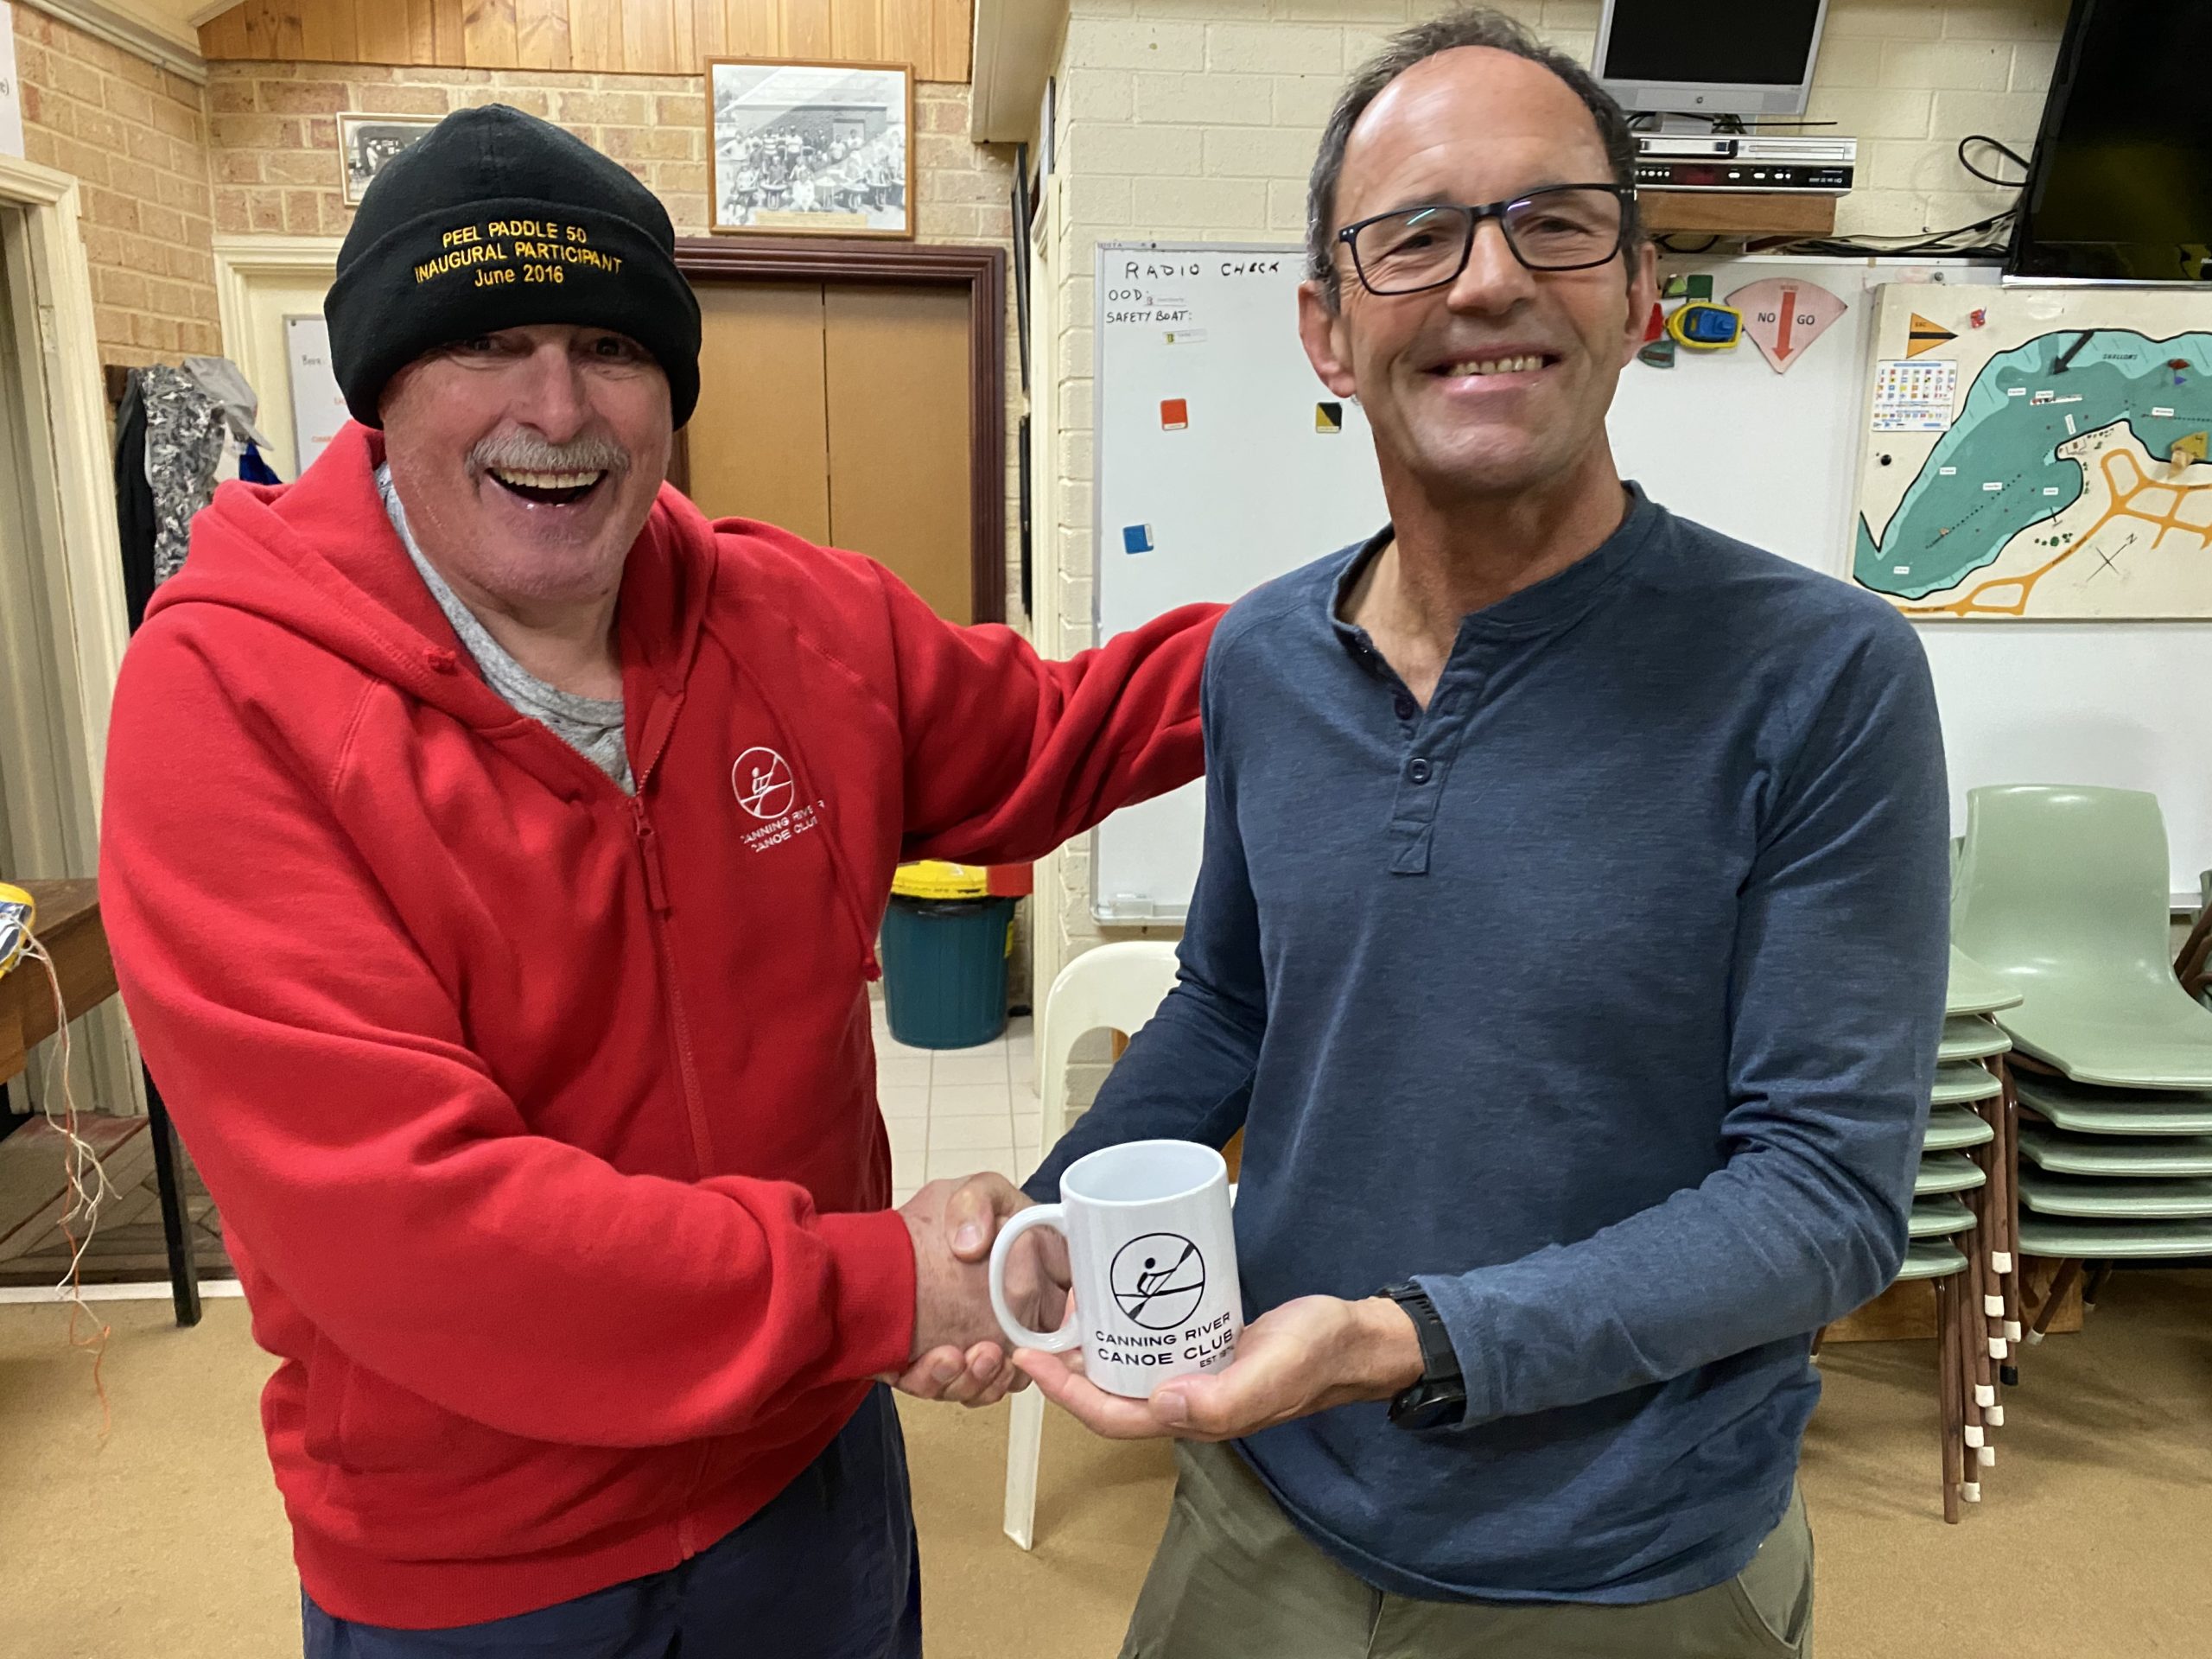 Tuesday 22nd September 2020 : Tonight’s photo shows club member Louis Botes presenting tonight’s winner Doug Hodson with a Club Mug.